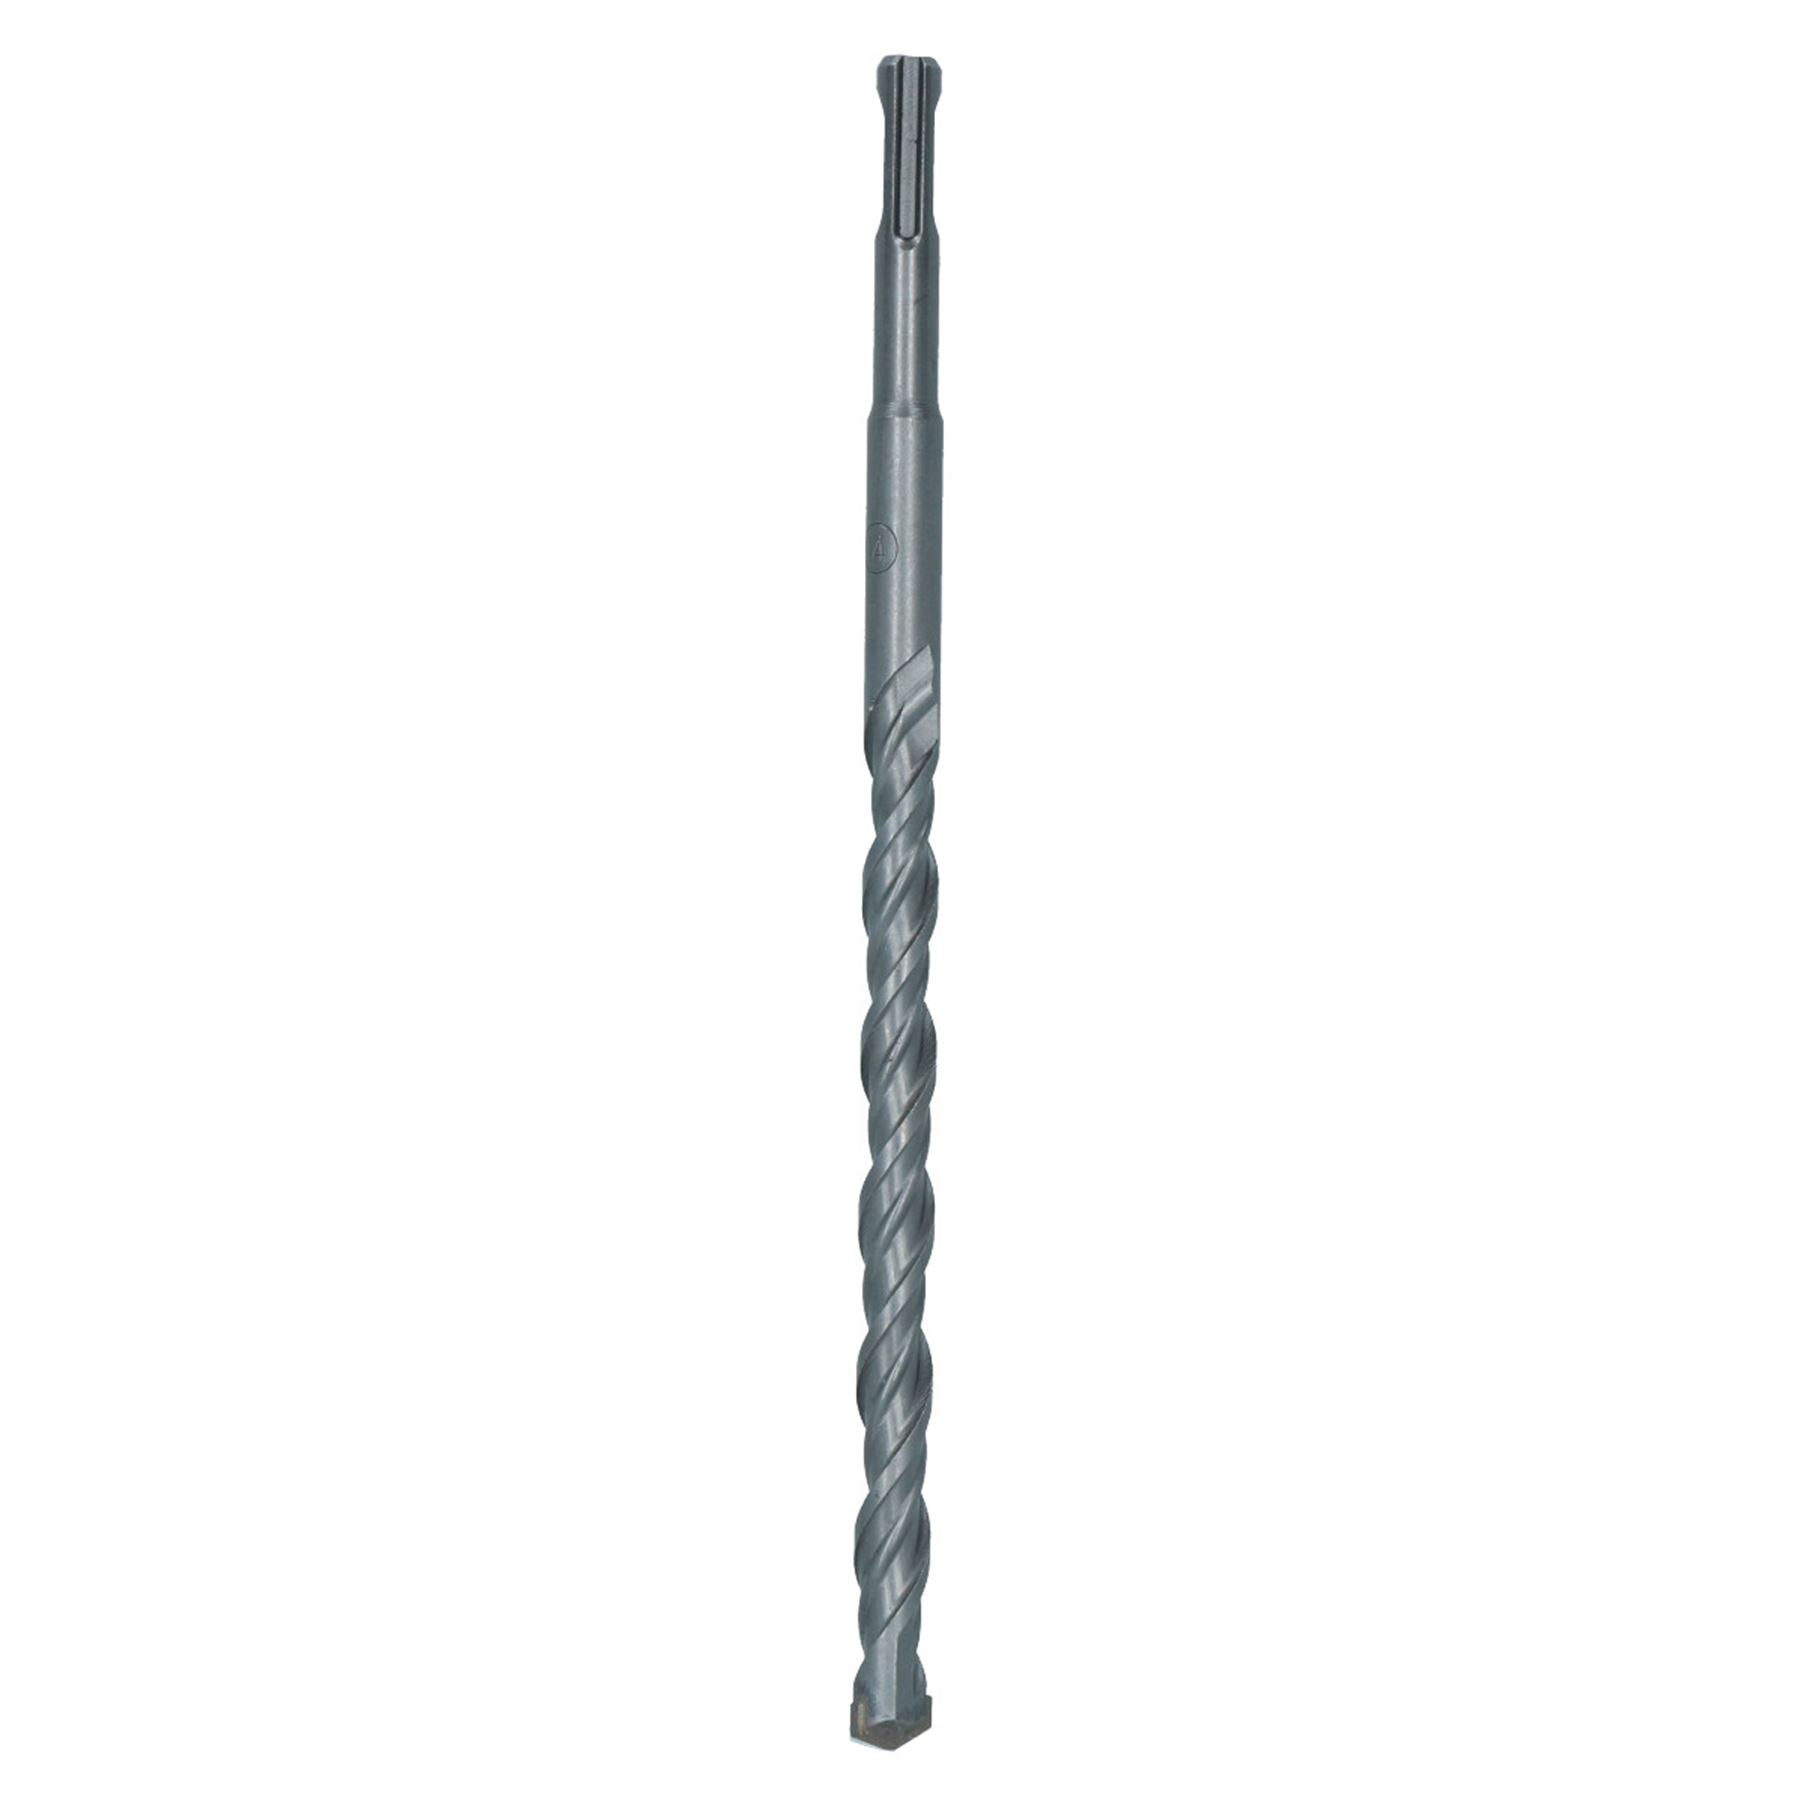 Metric Masonry Drill with Carbide Tip for Stone Concrete Brick Block 8mm – 16mm